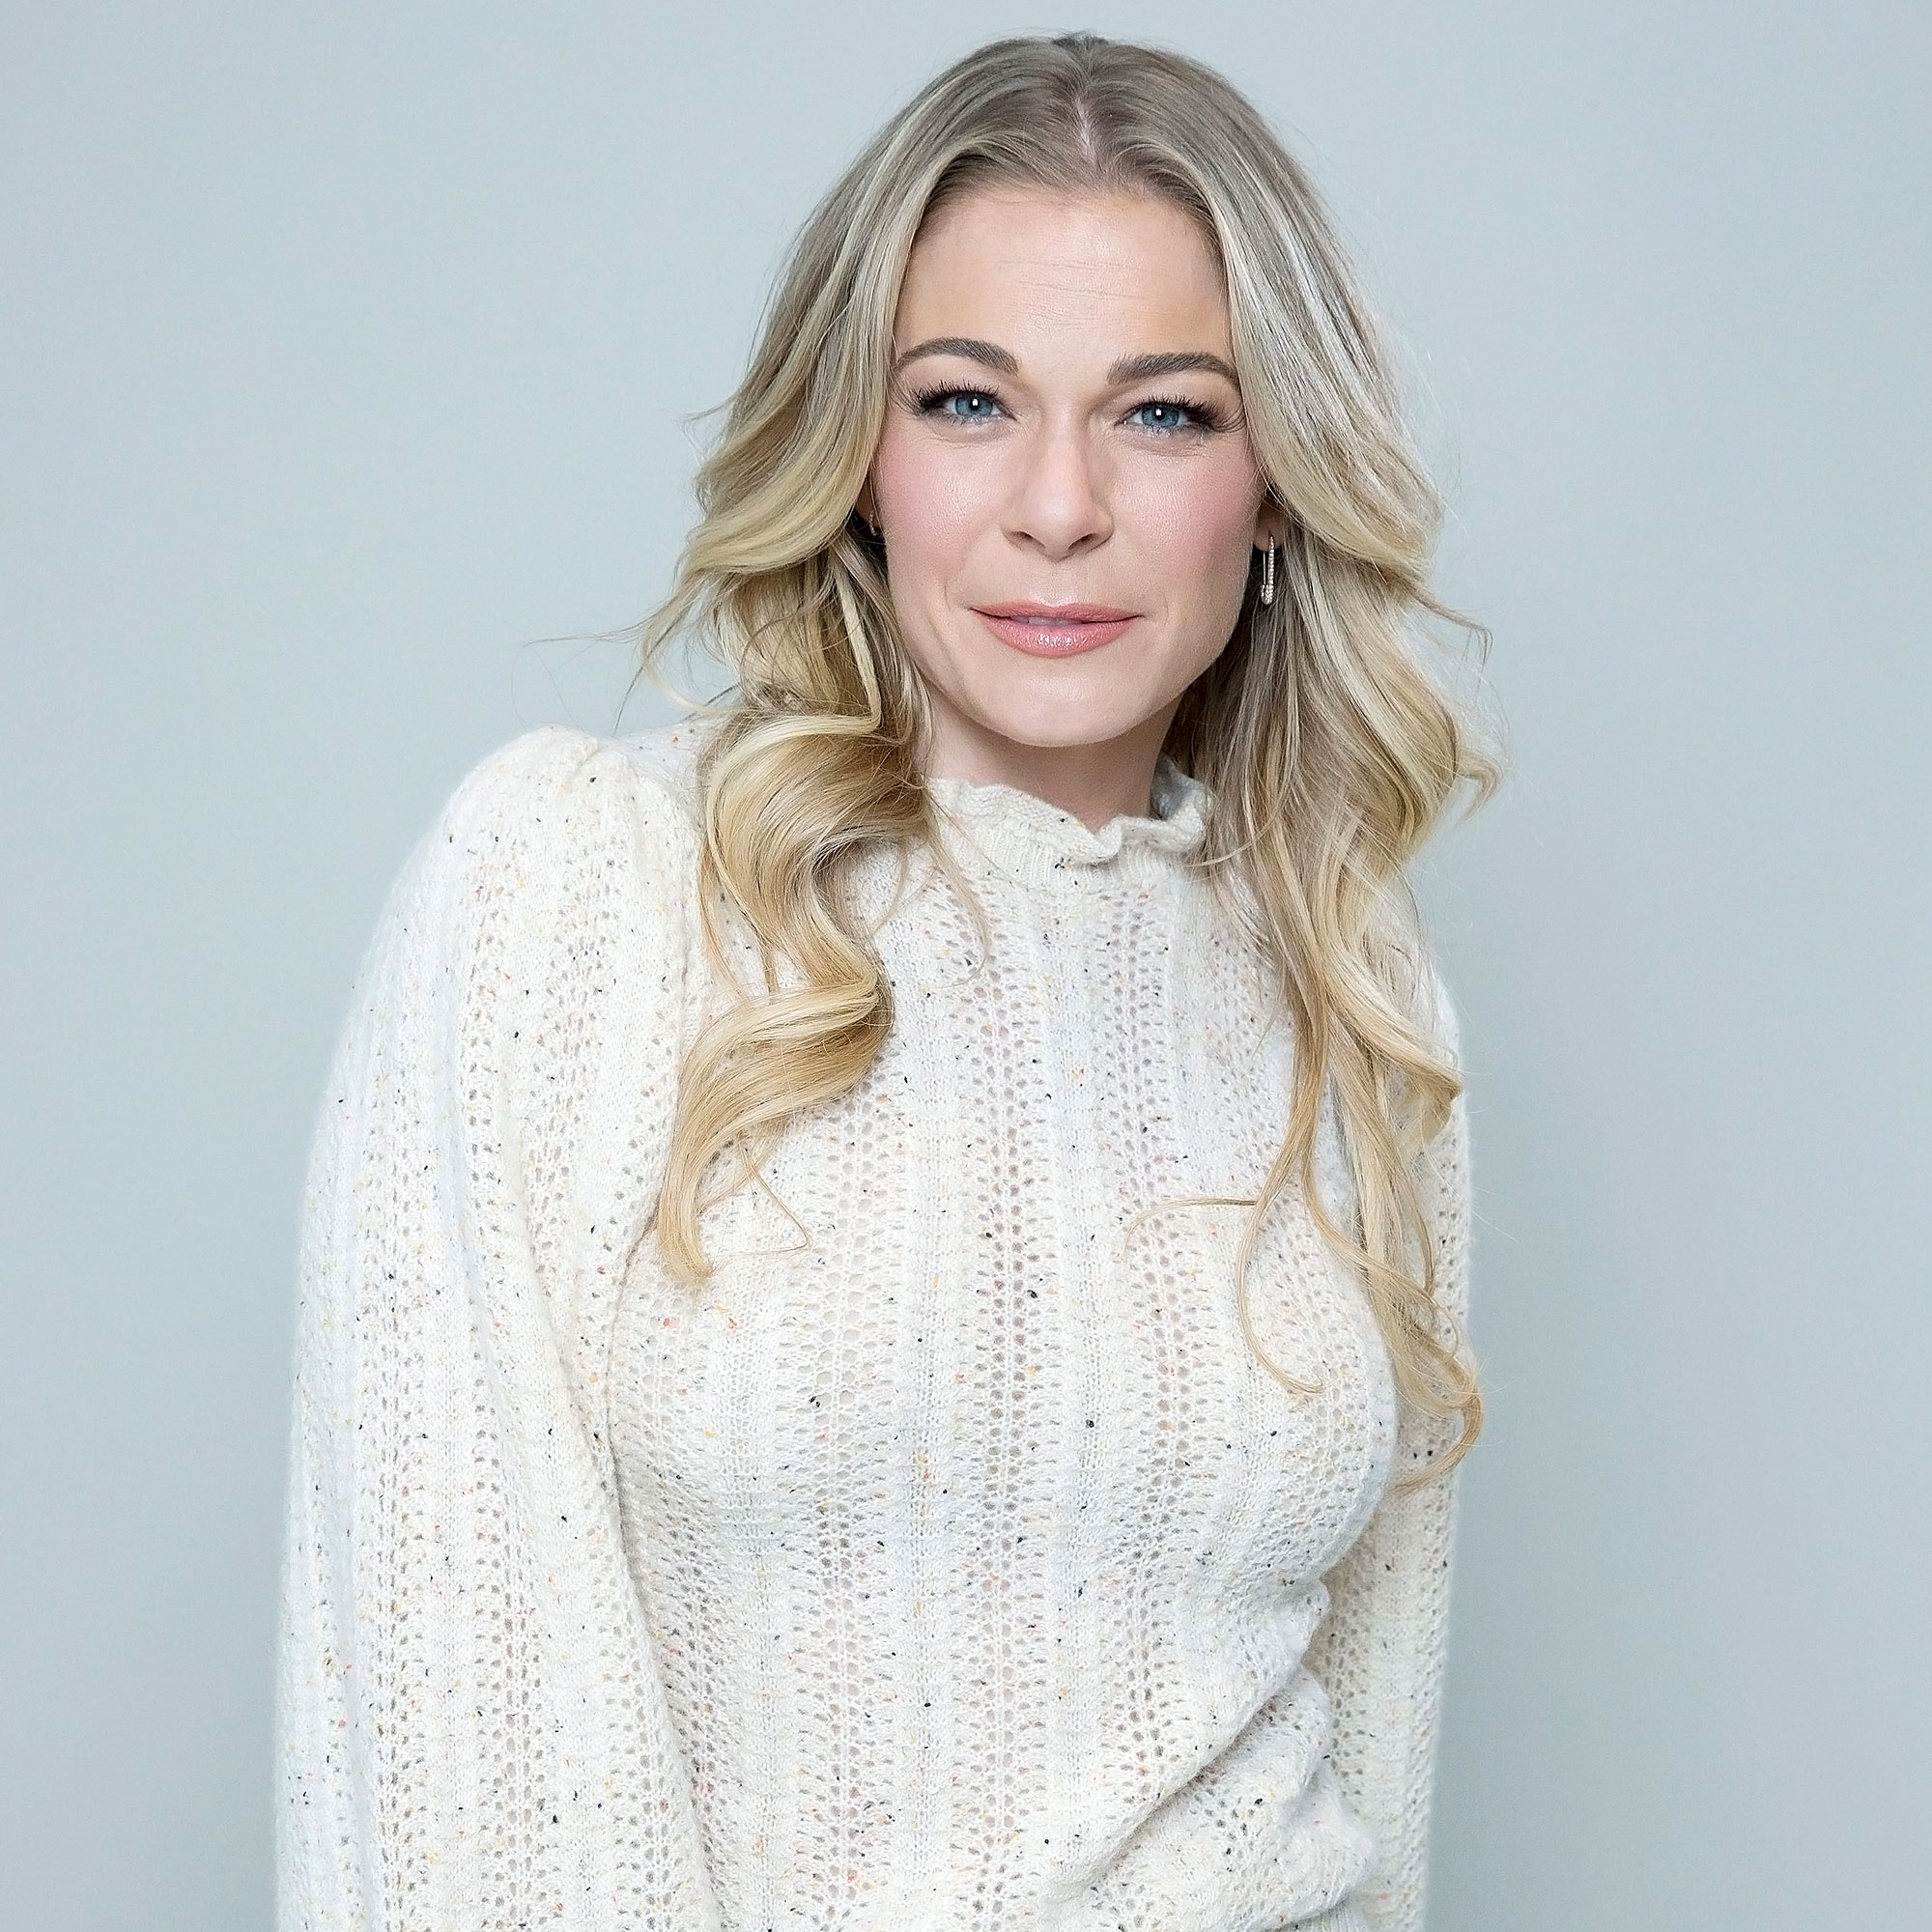 LeAnn Rimes Poses Nude After Psoriasis